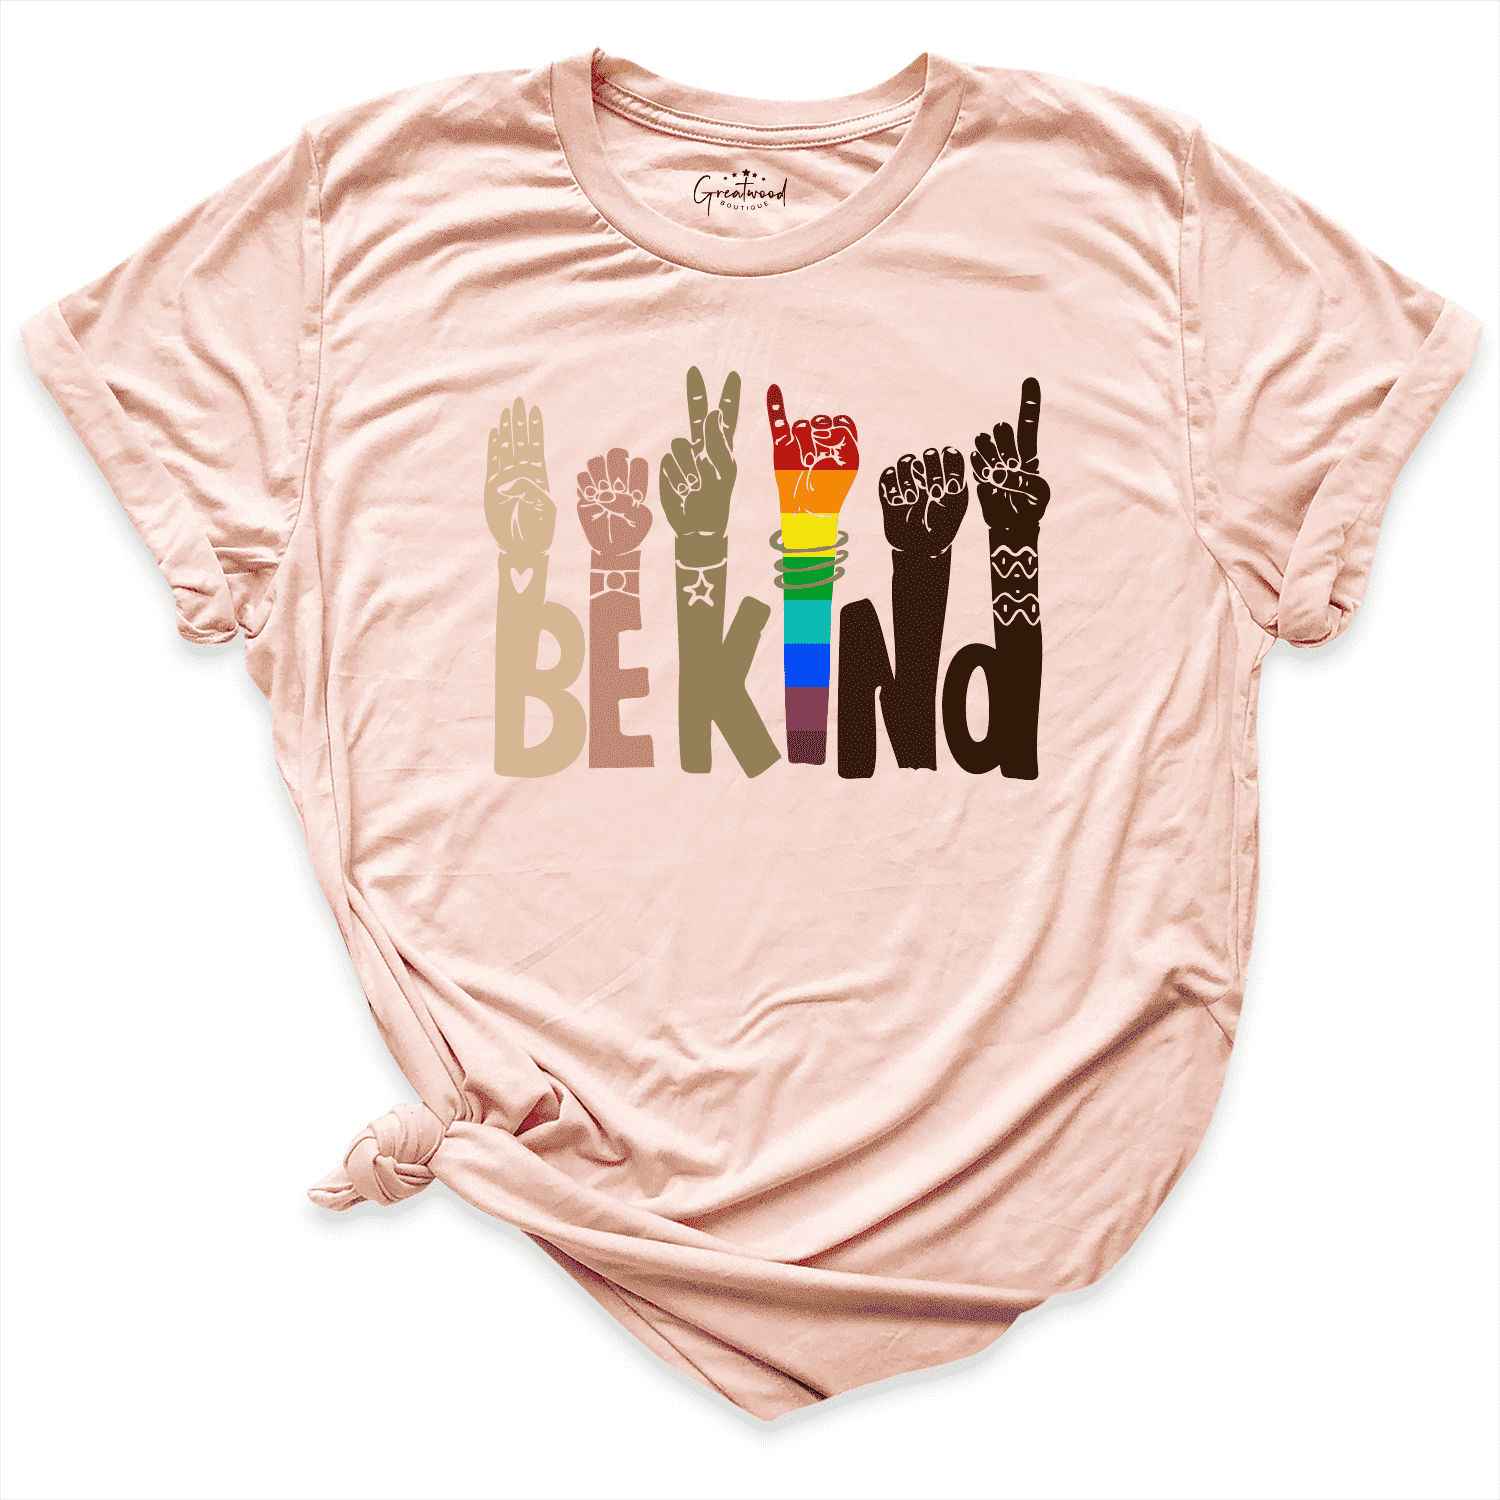 Kind Sign Language Shirt Peach - Greatwood Boutique